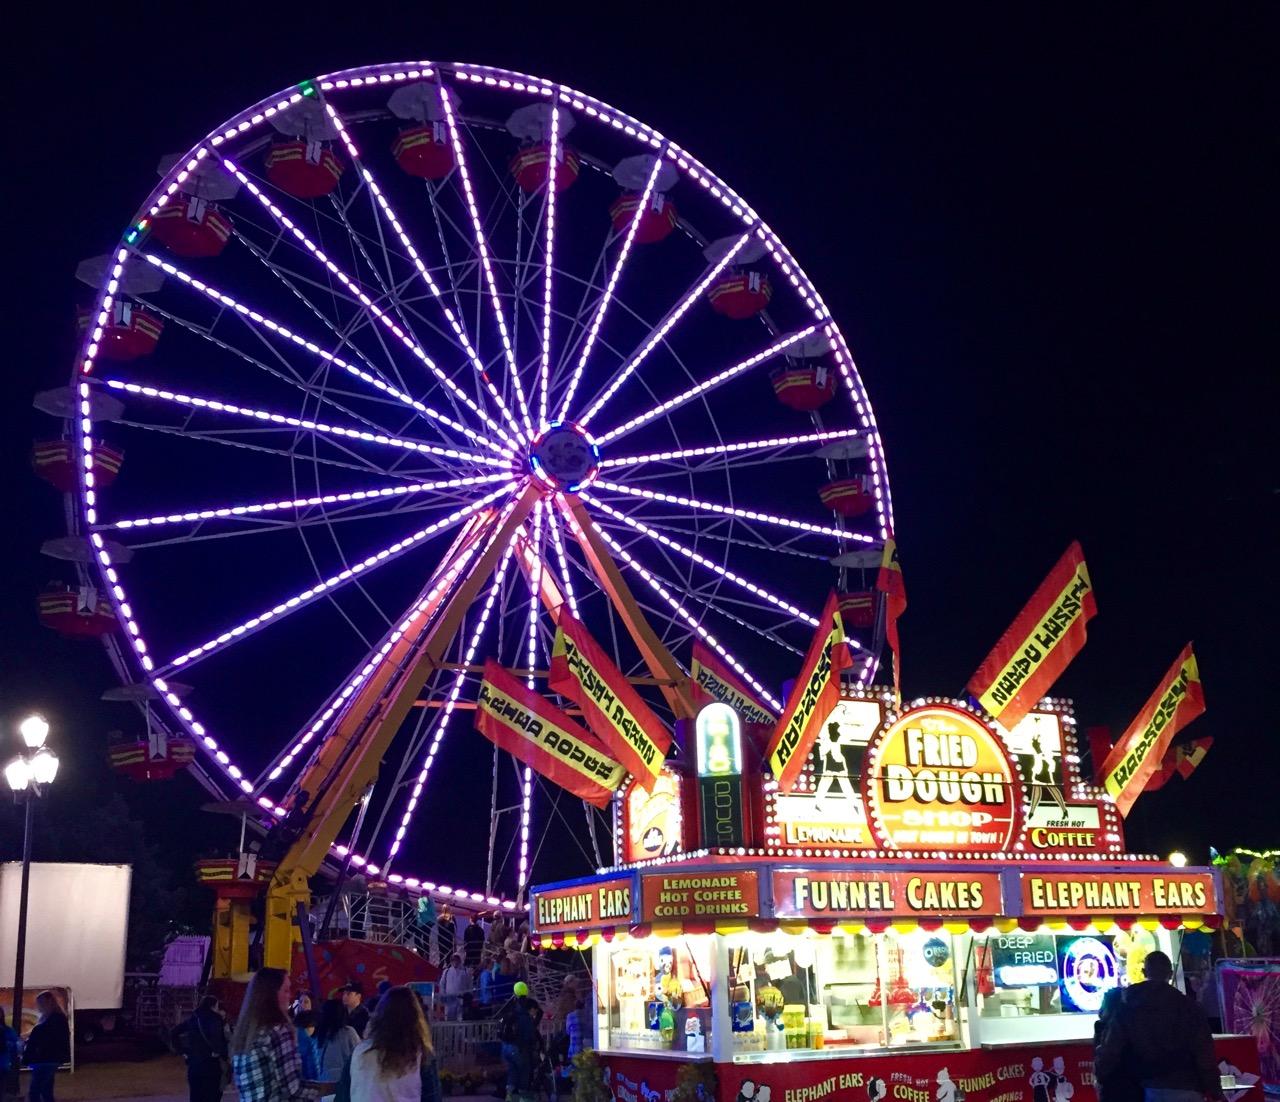 Experiencing the culture of the North Carolina State Fair The Howler